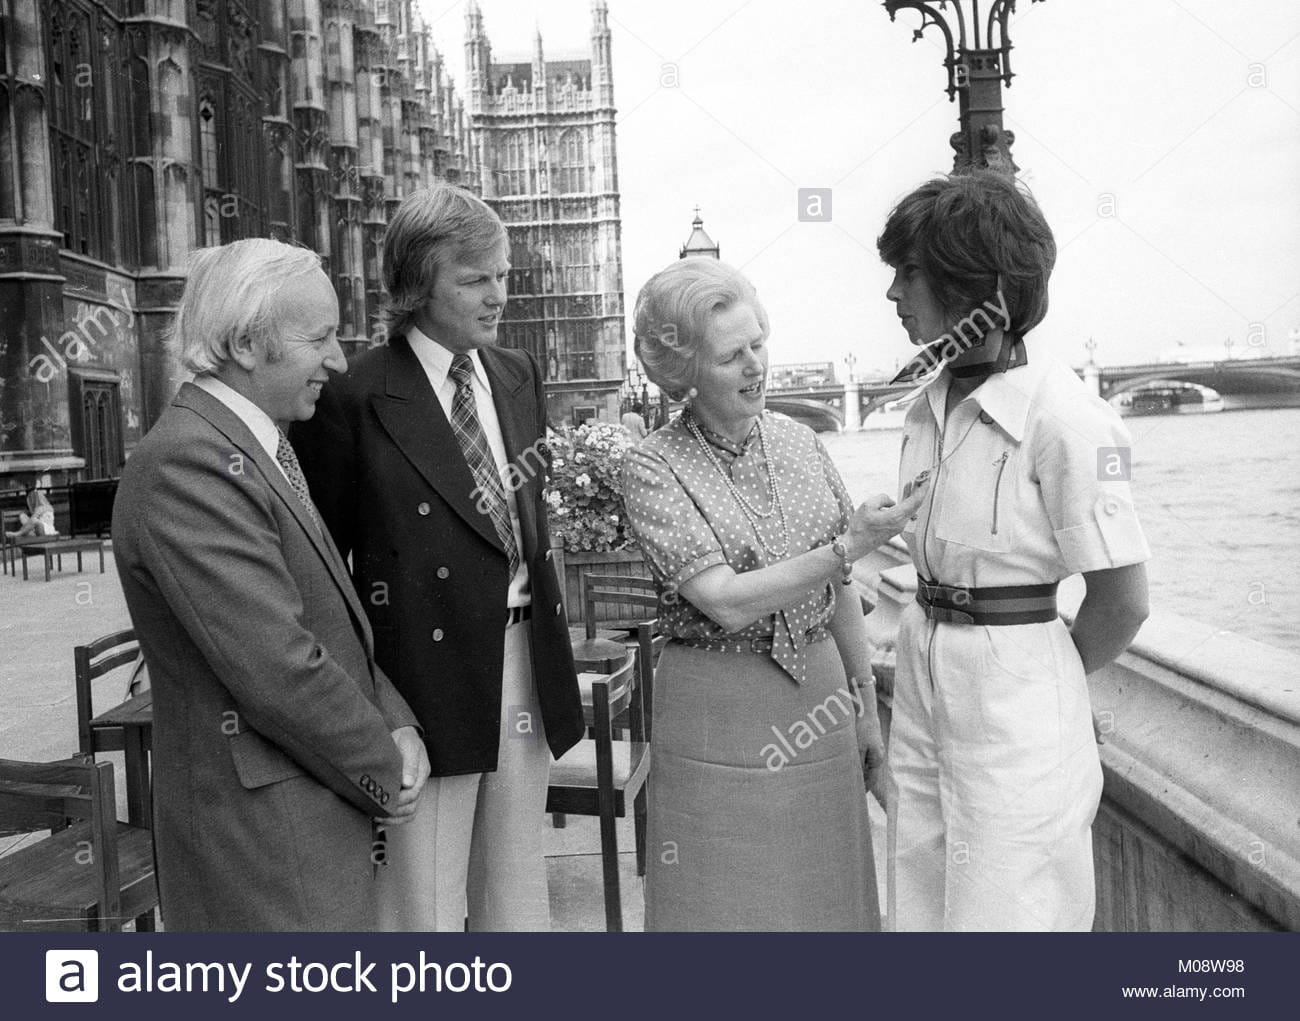 John Surtees, Ronnie Peterson, Margareth Thatcher and Divina Galica on the House of Commons Terrace, London, in July 1976. 